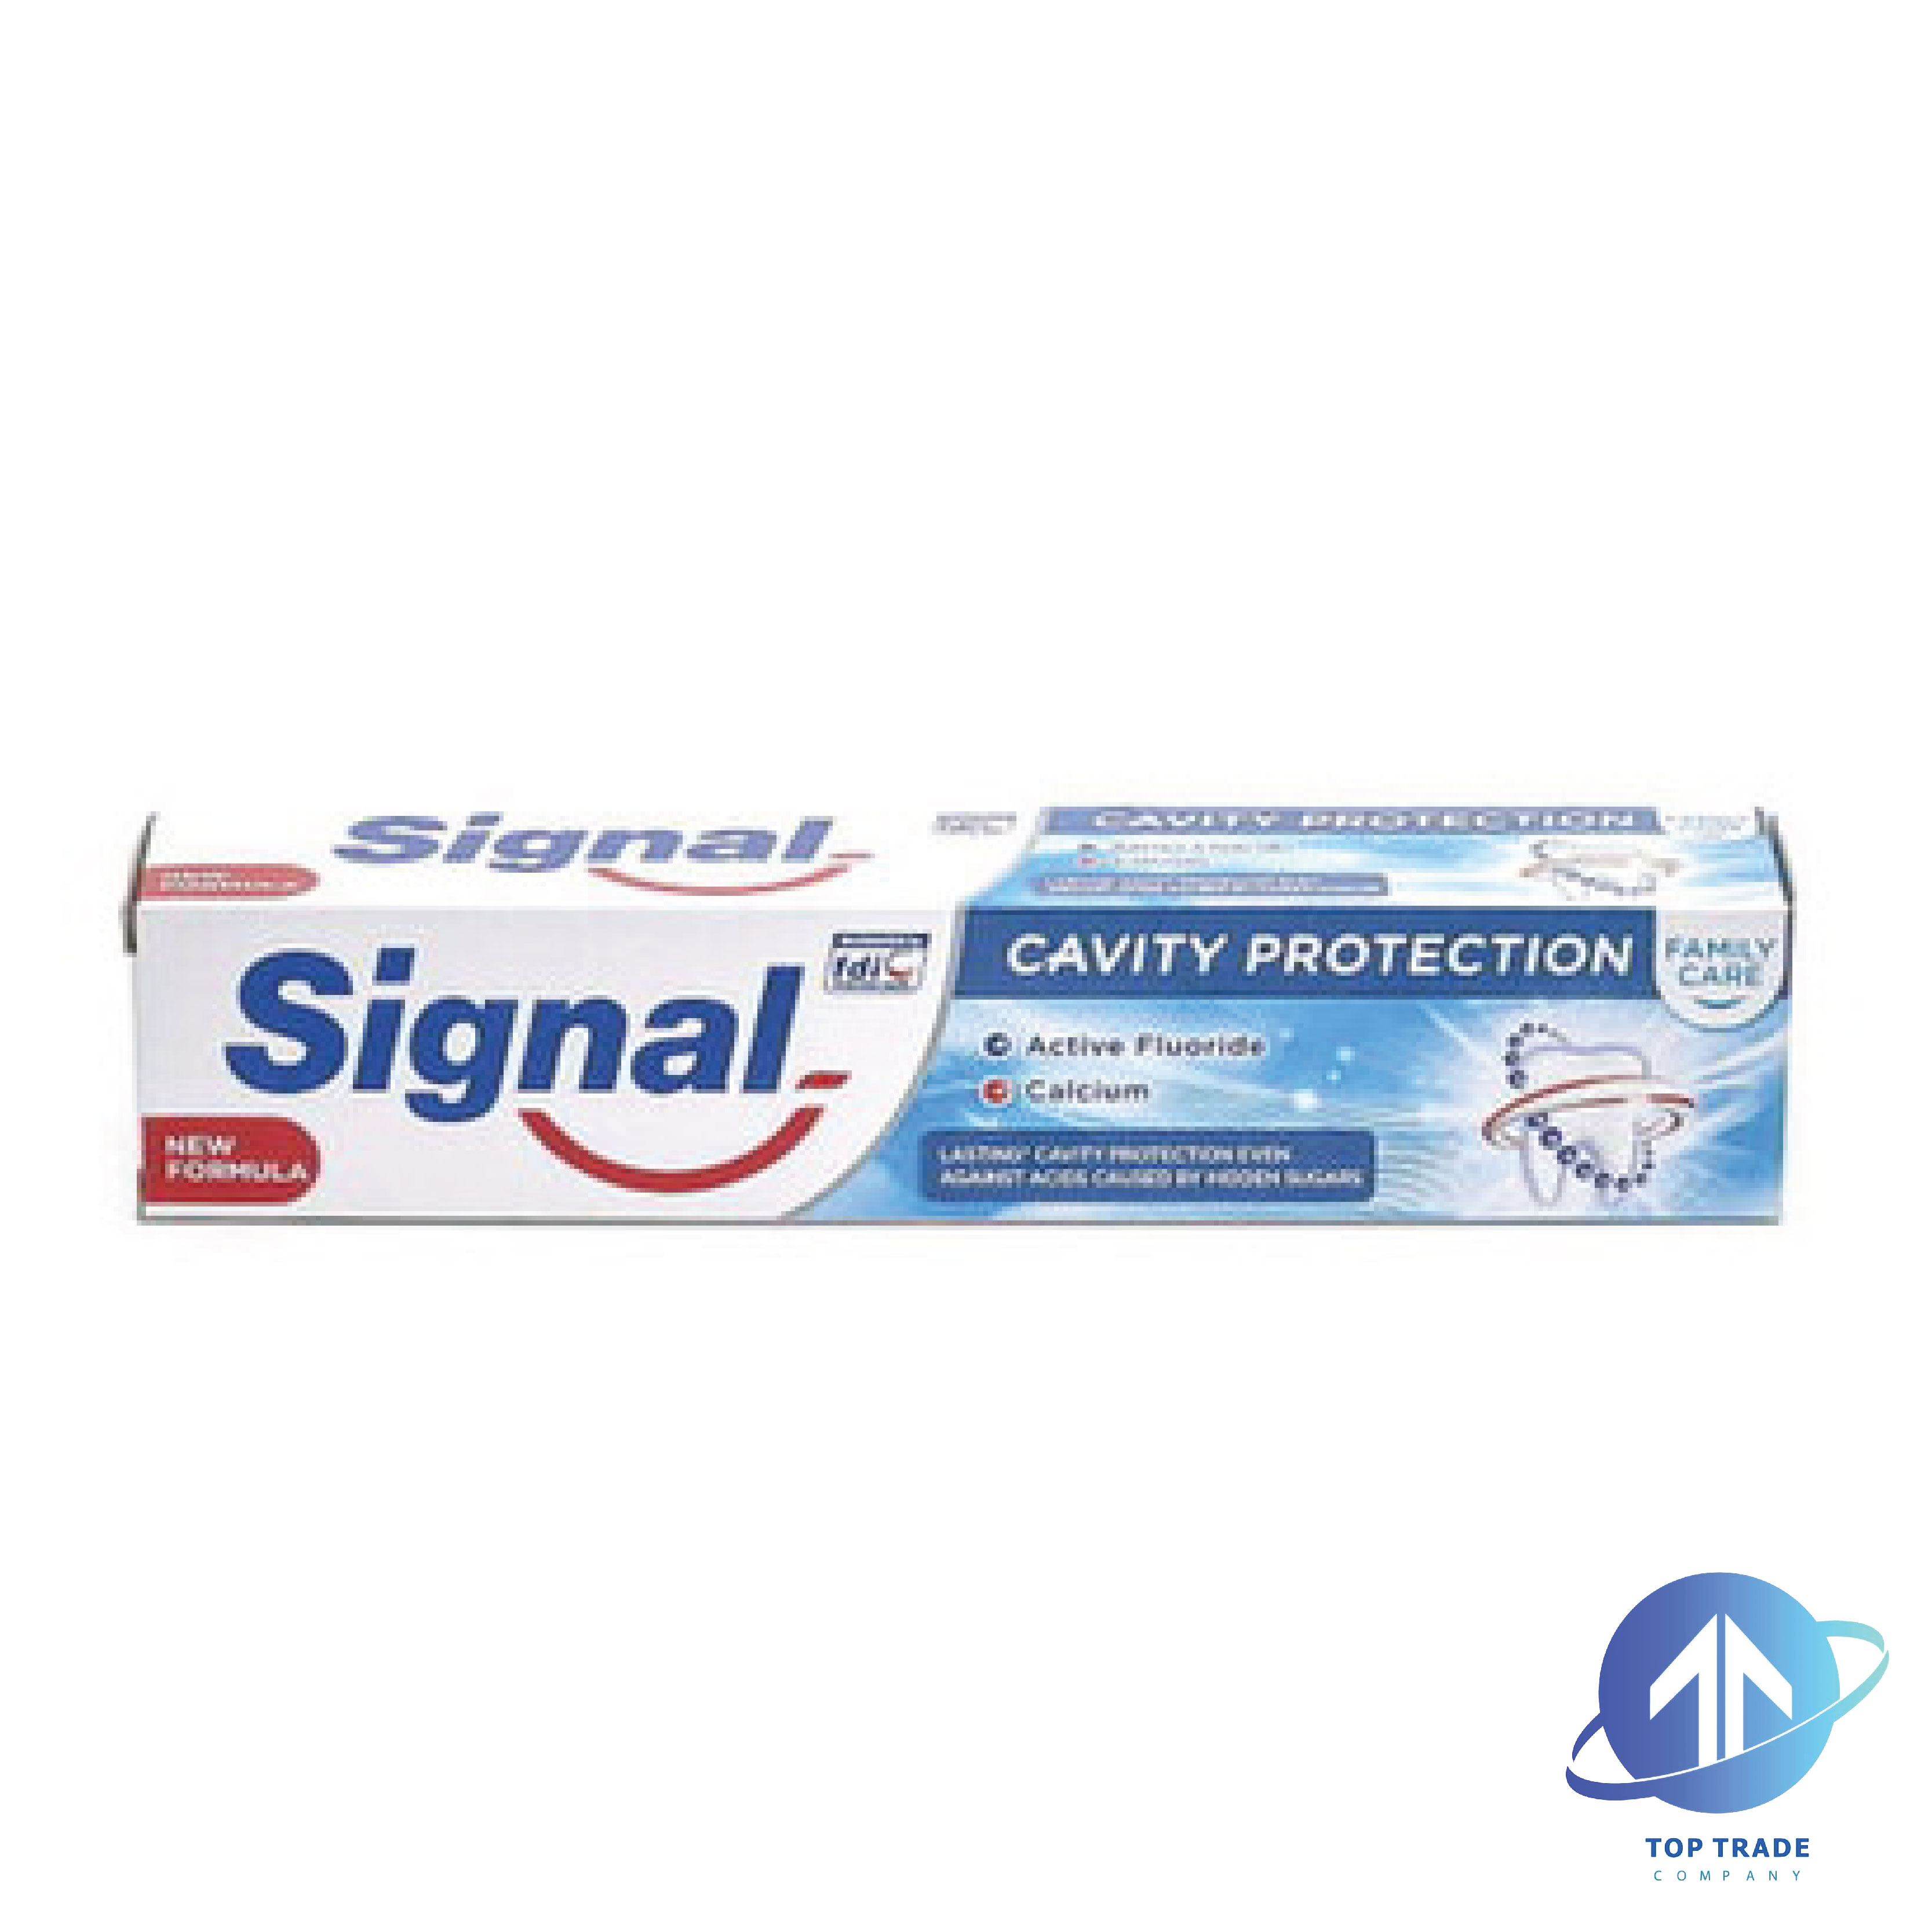 Signal toothpaste family care cavity protection labelled 75ml